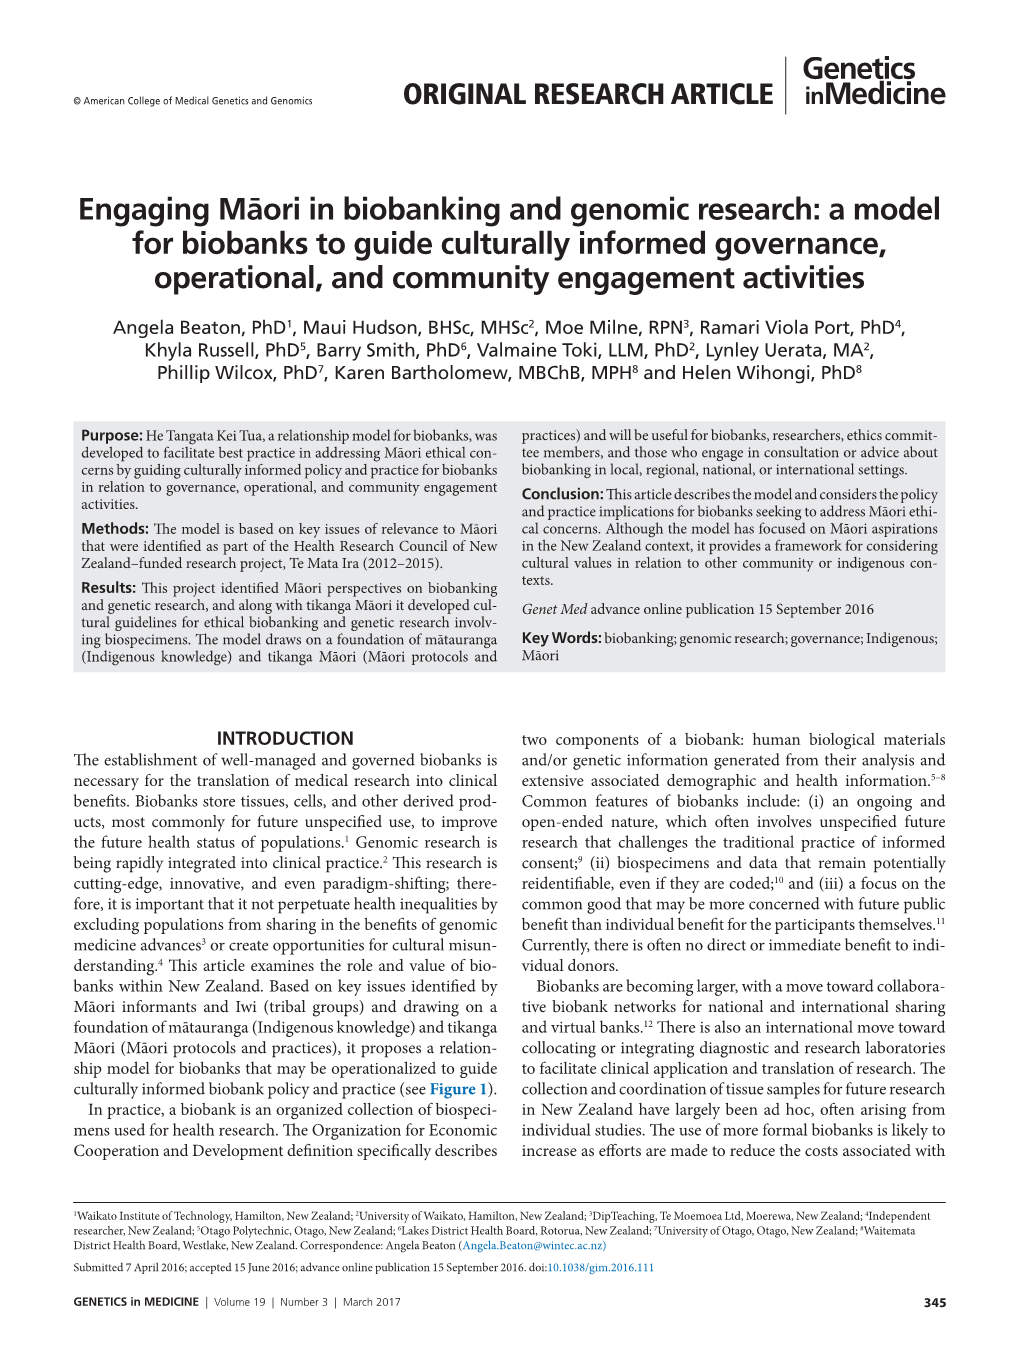 Engaging Māori in Biobanking and Genomic Research: a Model for Biobanks to Guide Culturally Informed Governance, Operational, and Community Engagement Activities